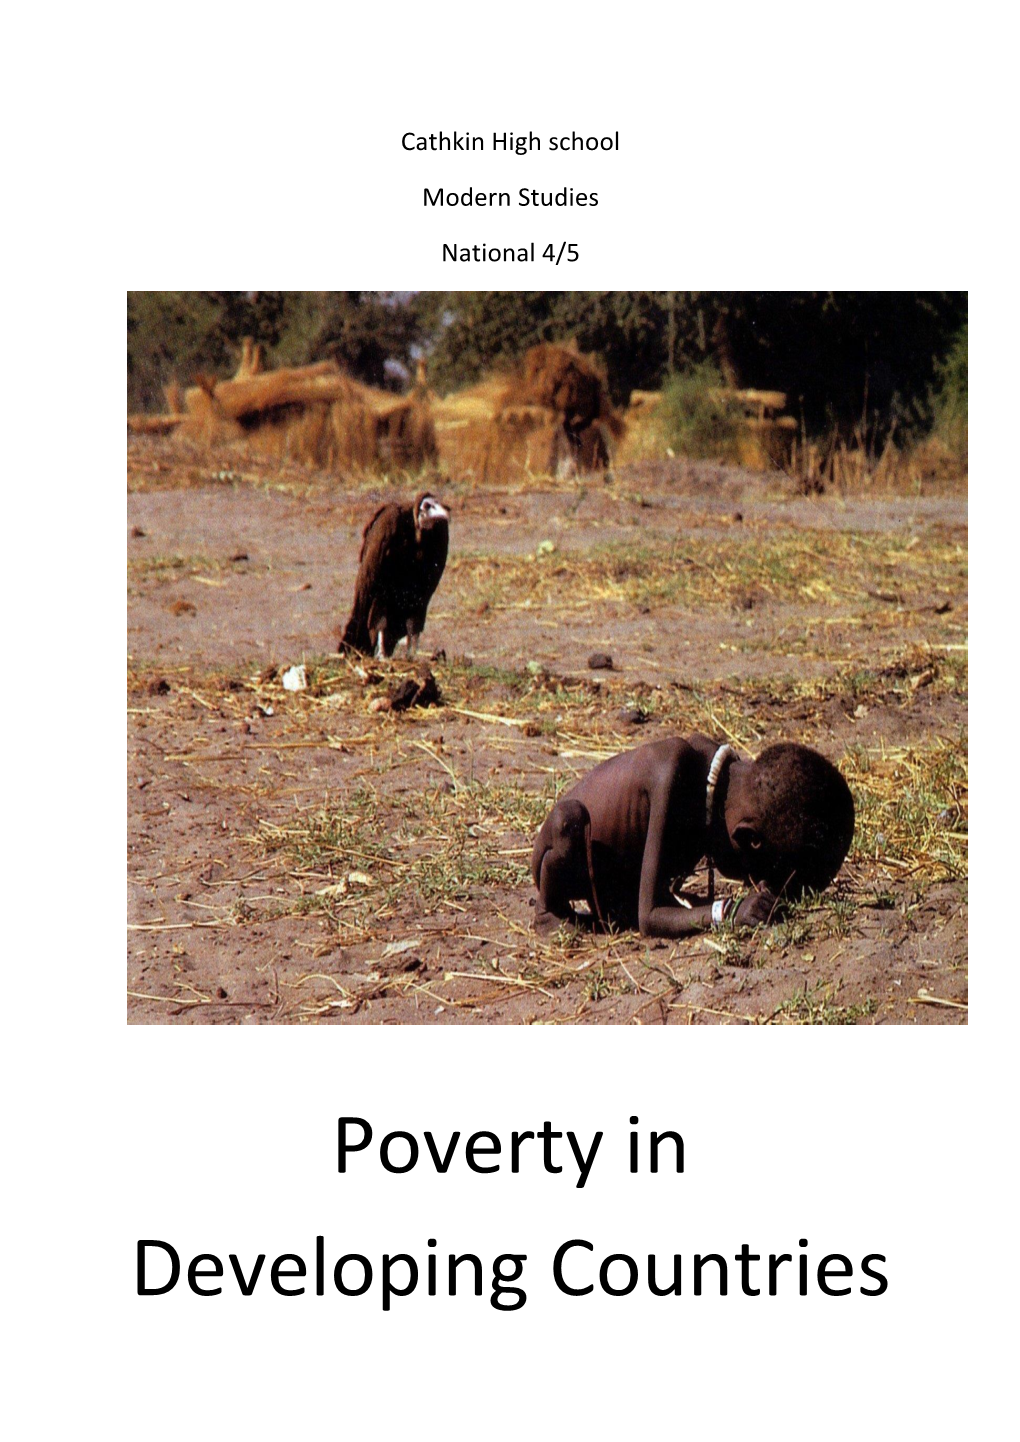 Poverty in Developing Countries Contents